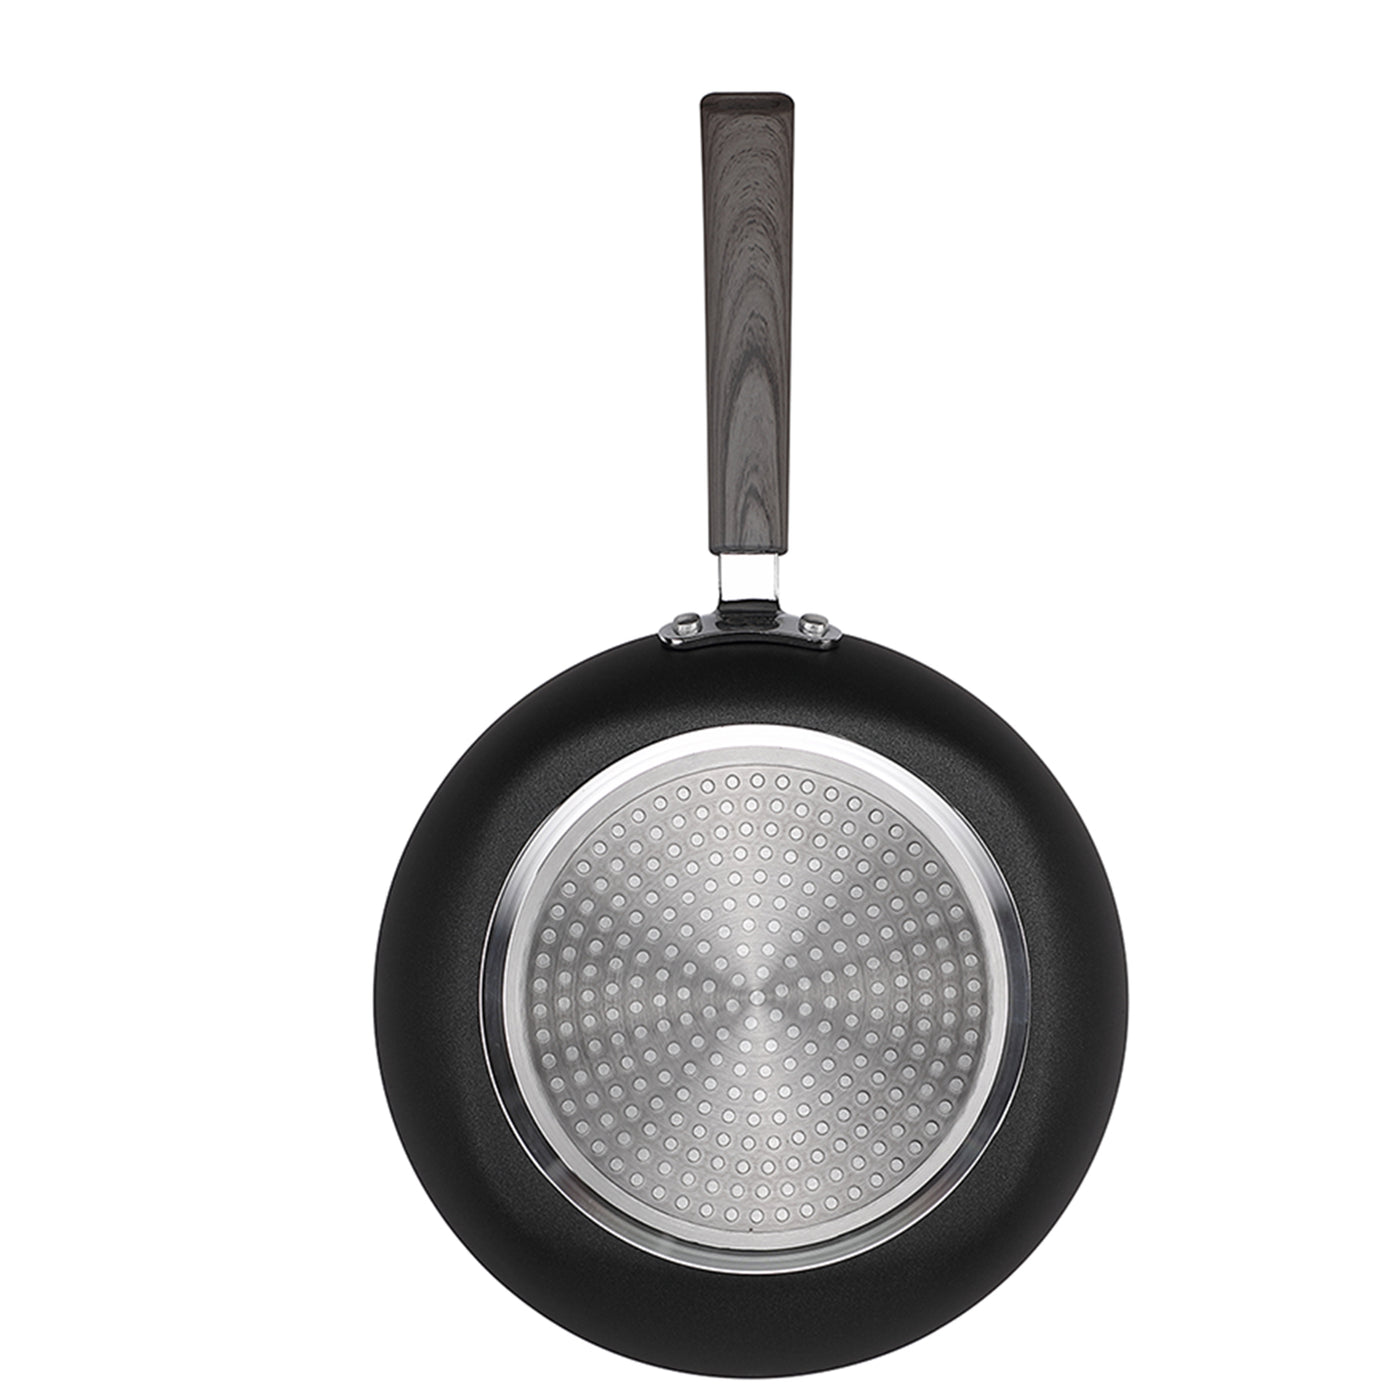 Tefal One Egg Wonder frying pan  Cooking pan, Cookery, Find recipes